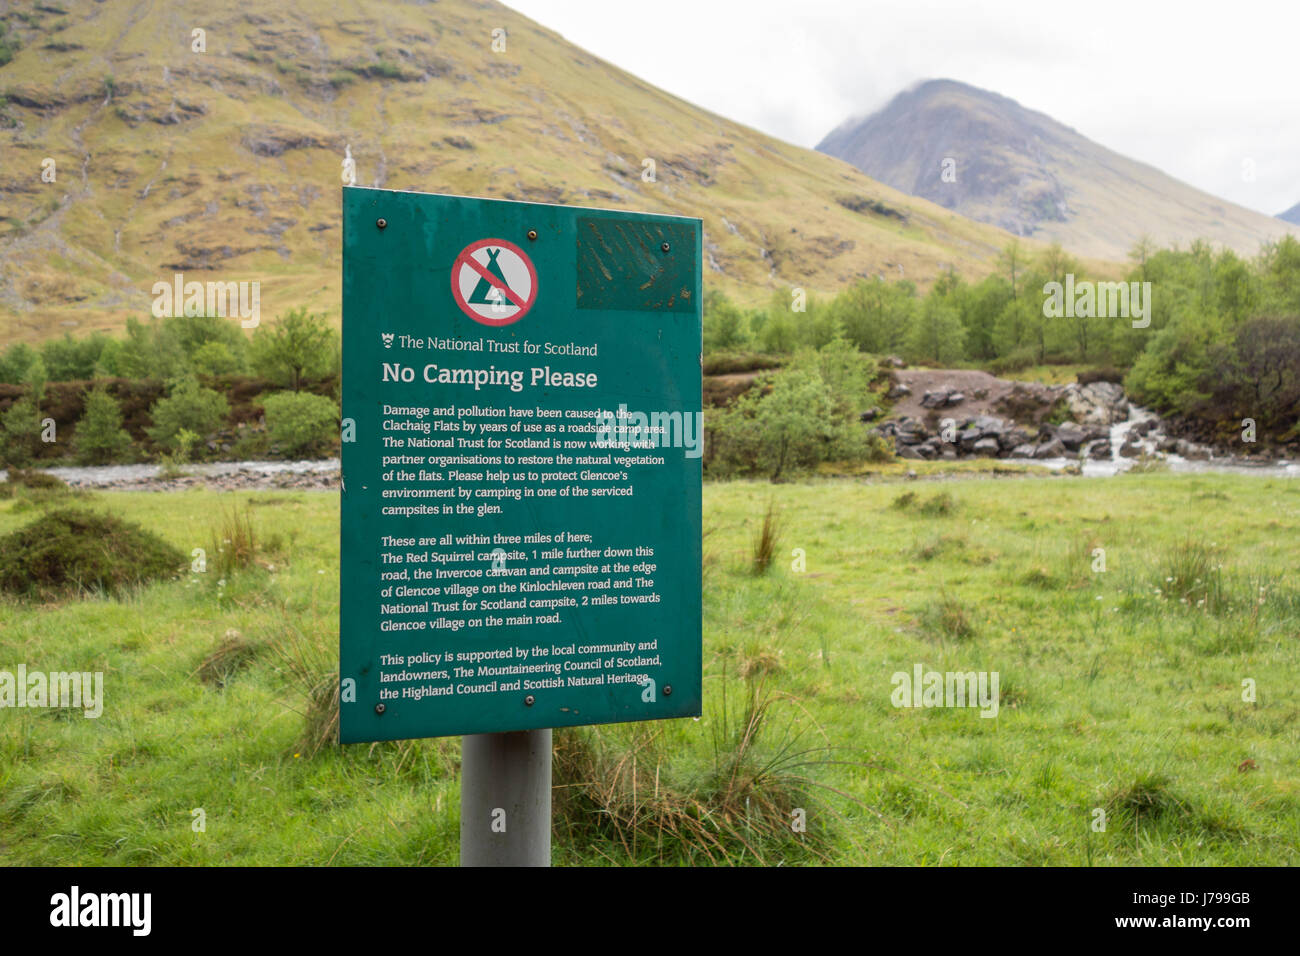 Glencoe wild camping - sign from National Trust for Scotland at Clachaig Flats, Glencoe requesting campers not to camp at Clachaig Flats Stock Photo